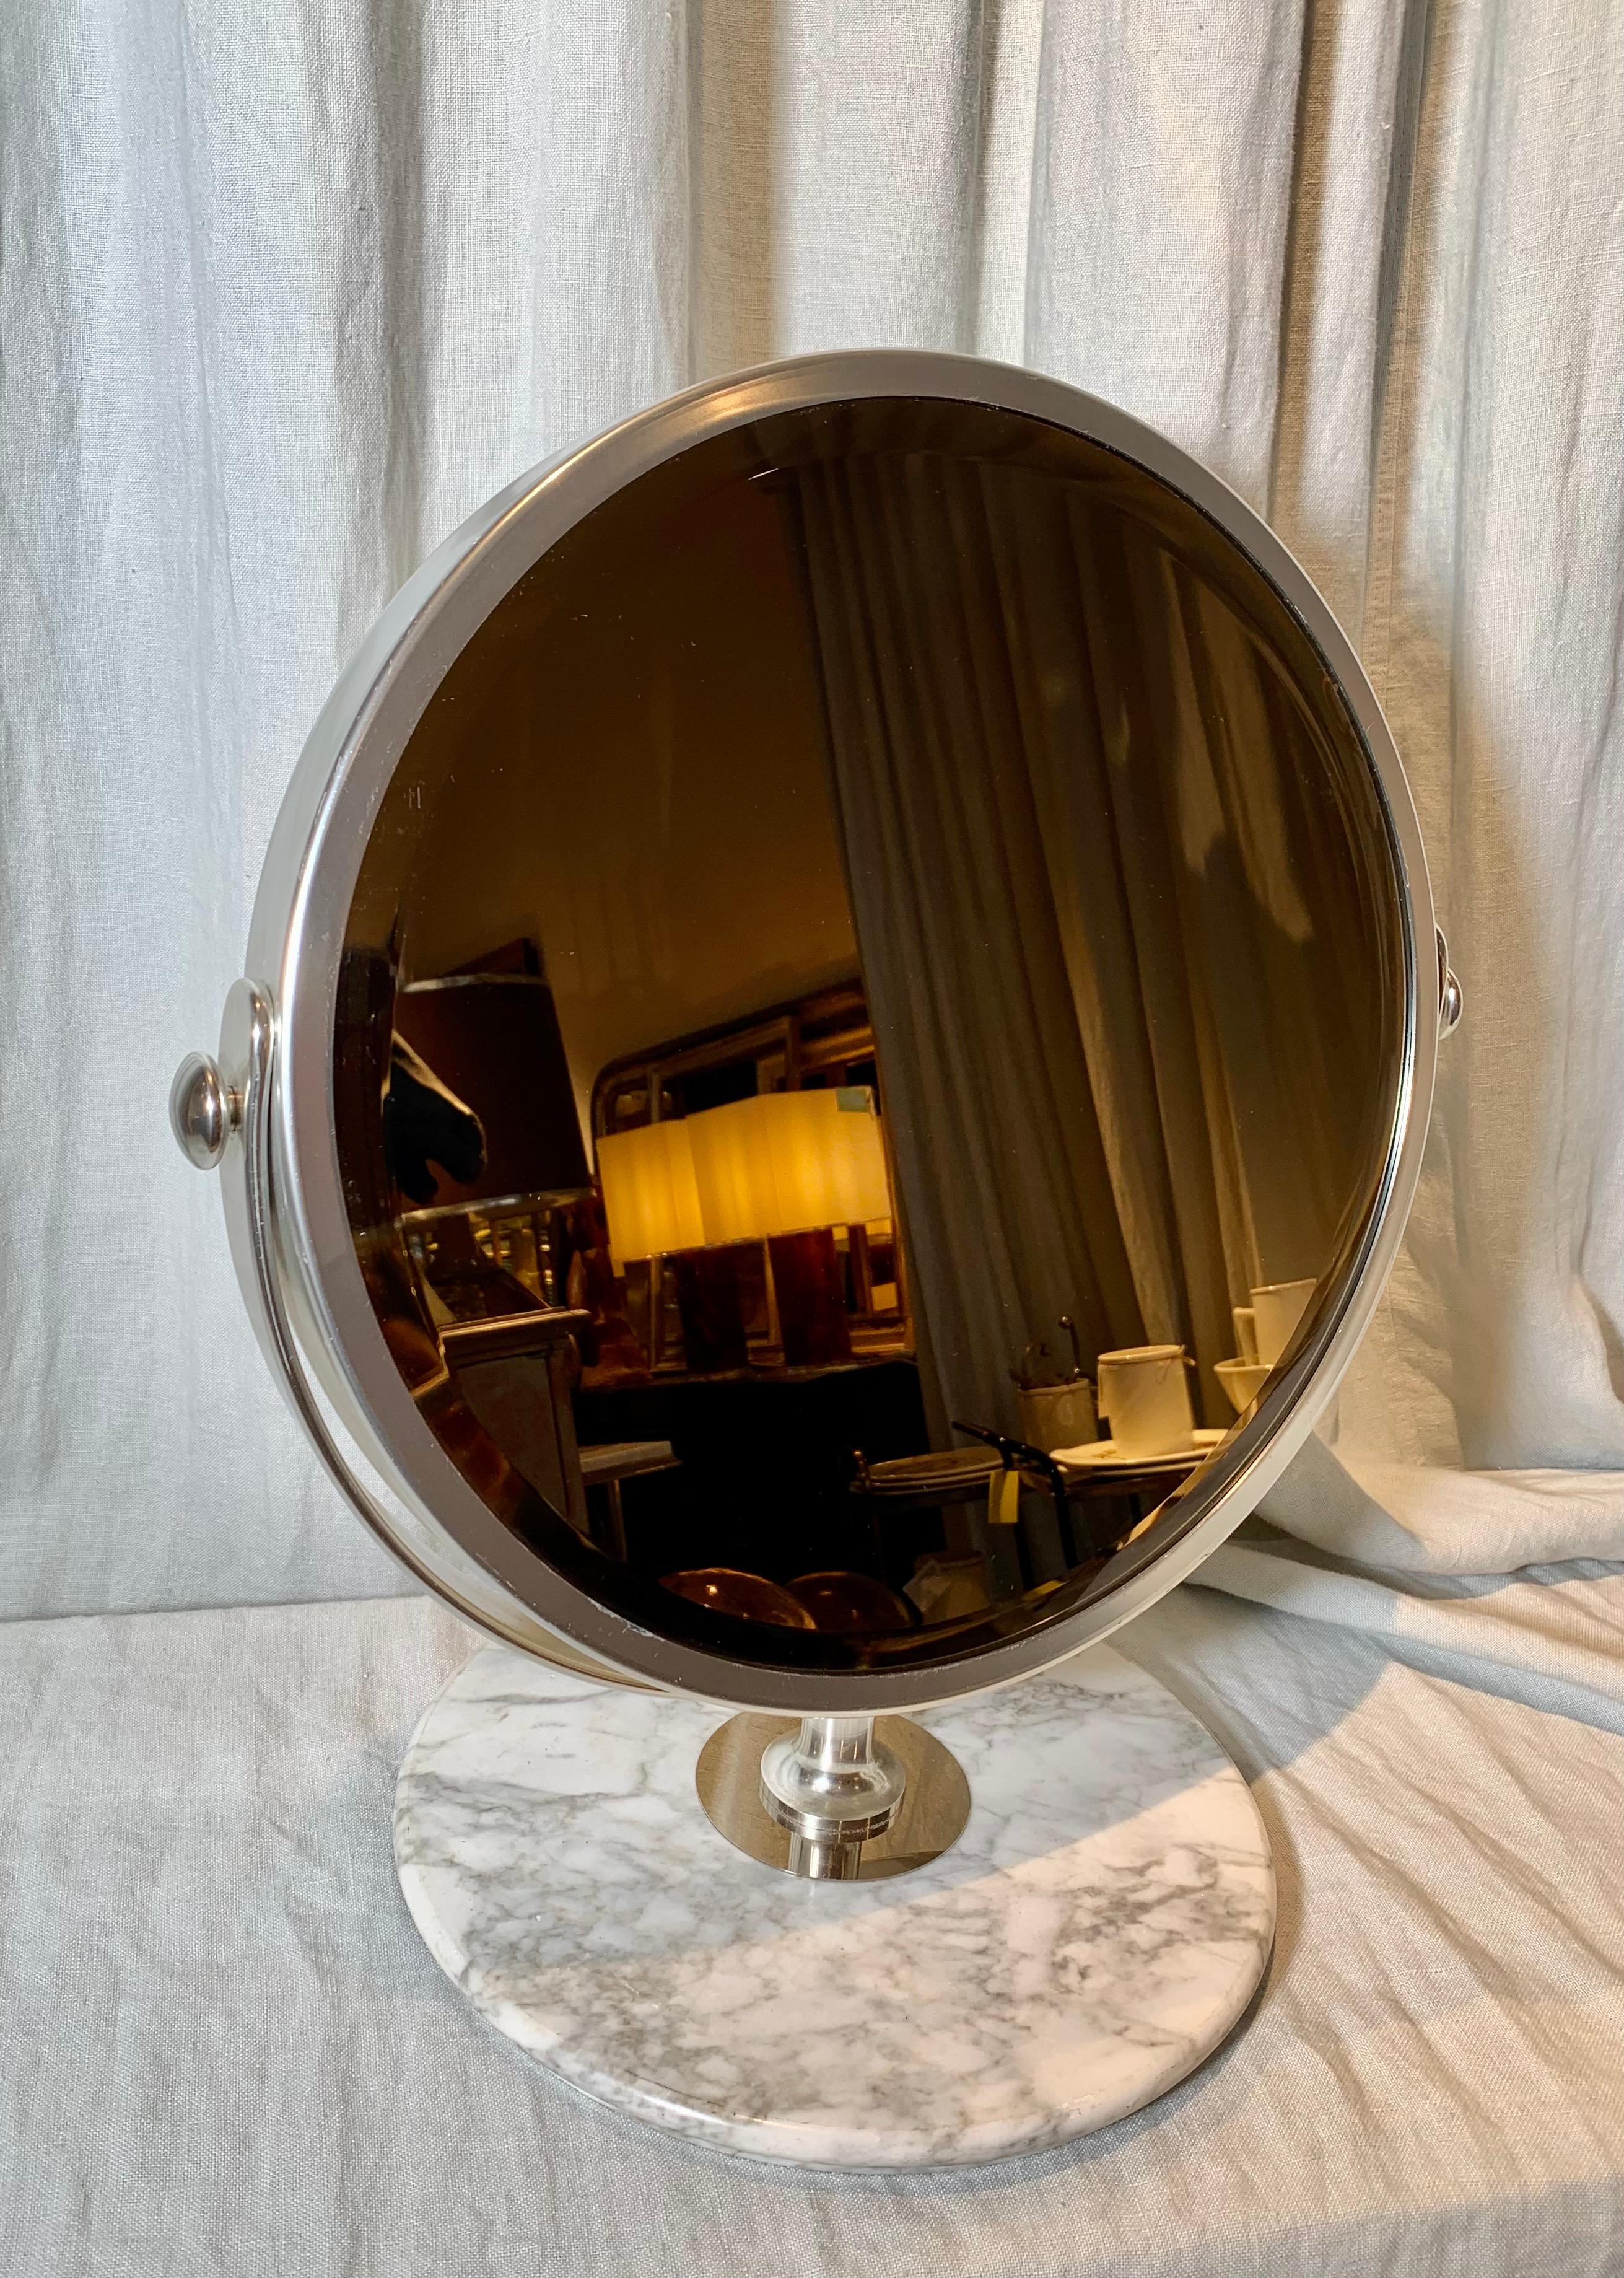 Chic French 1970s large vanity mirror in chrome with a carrara marble base. The mirrors position is adjustable and can be fixated by the side brackets. True to the 1970s the circular mirror glass has a slight smoke color - very elegant.